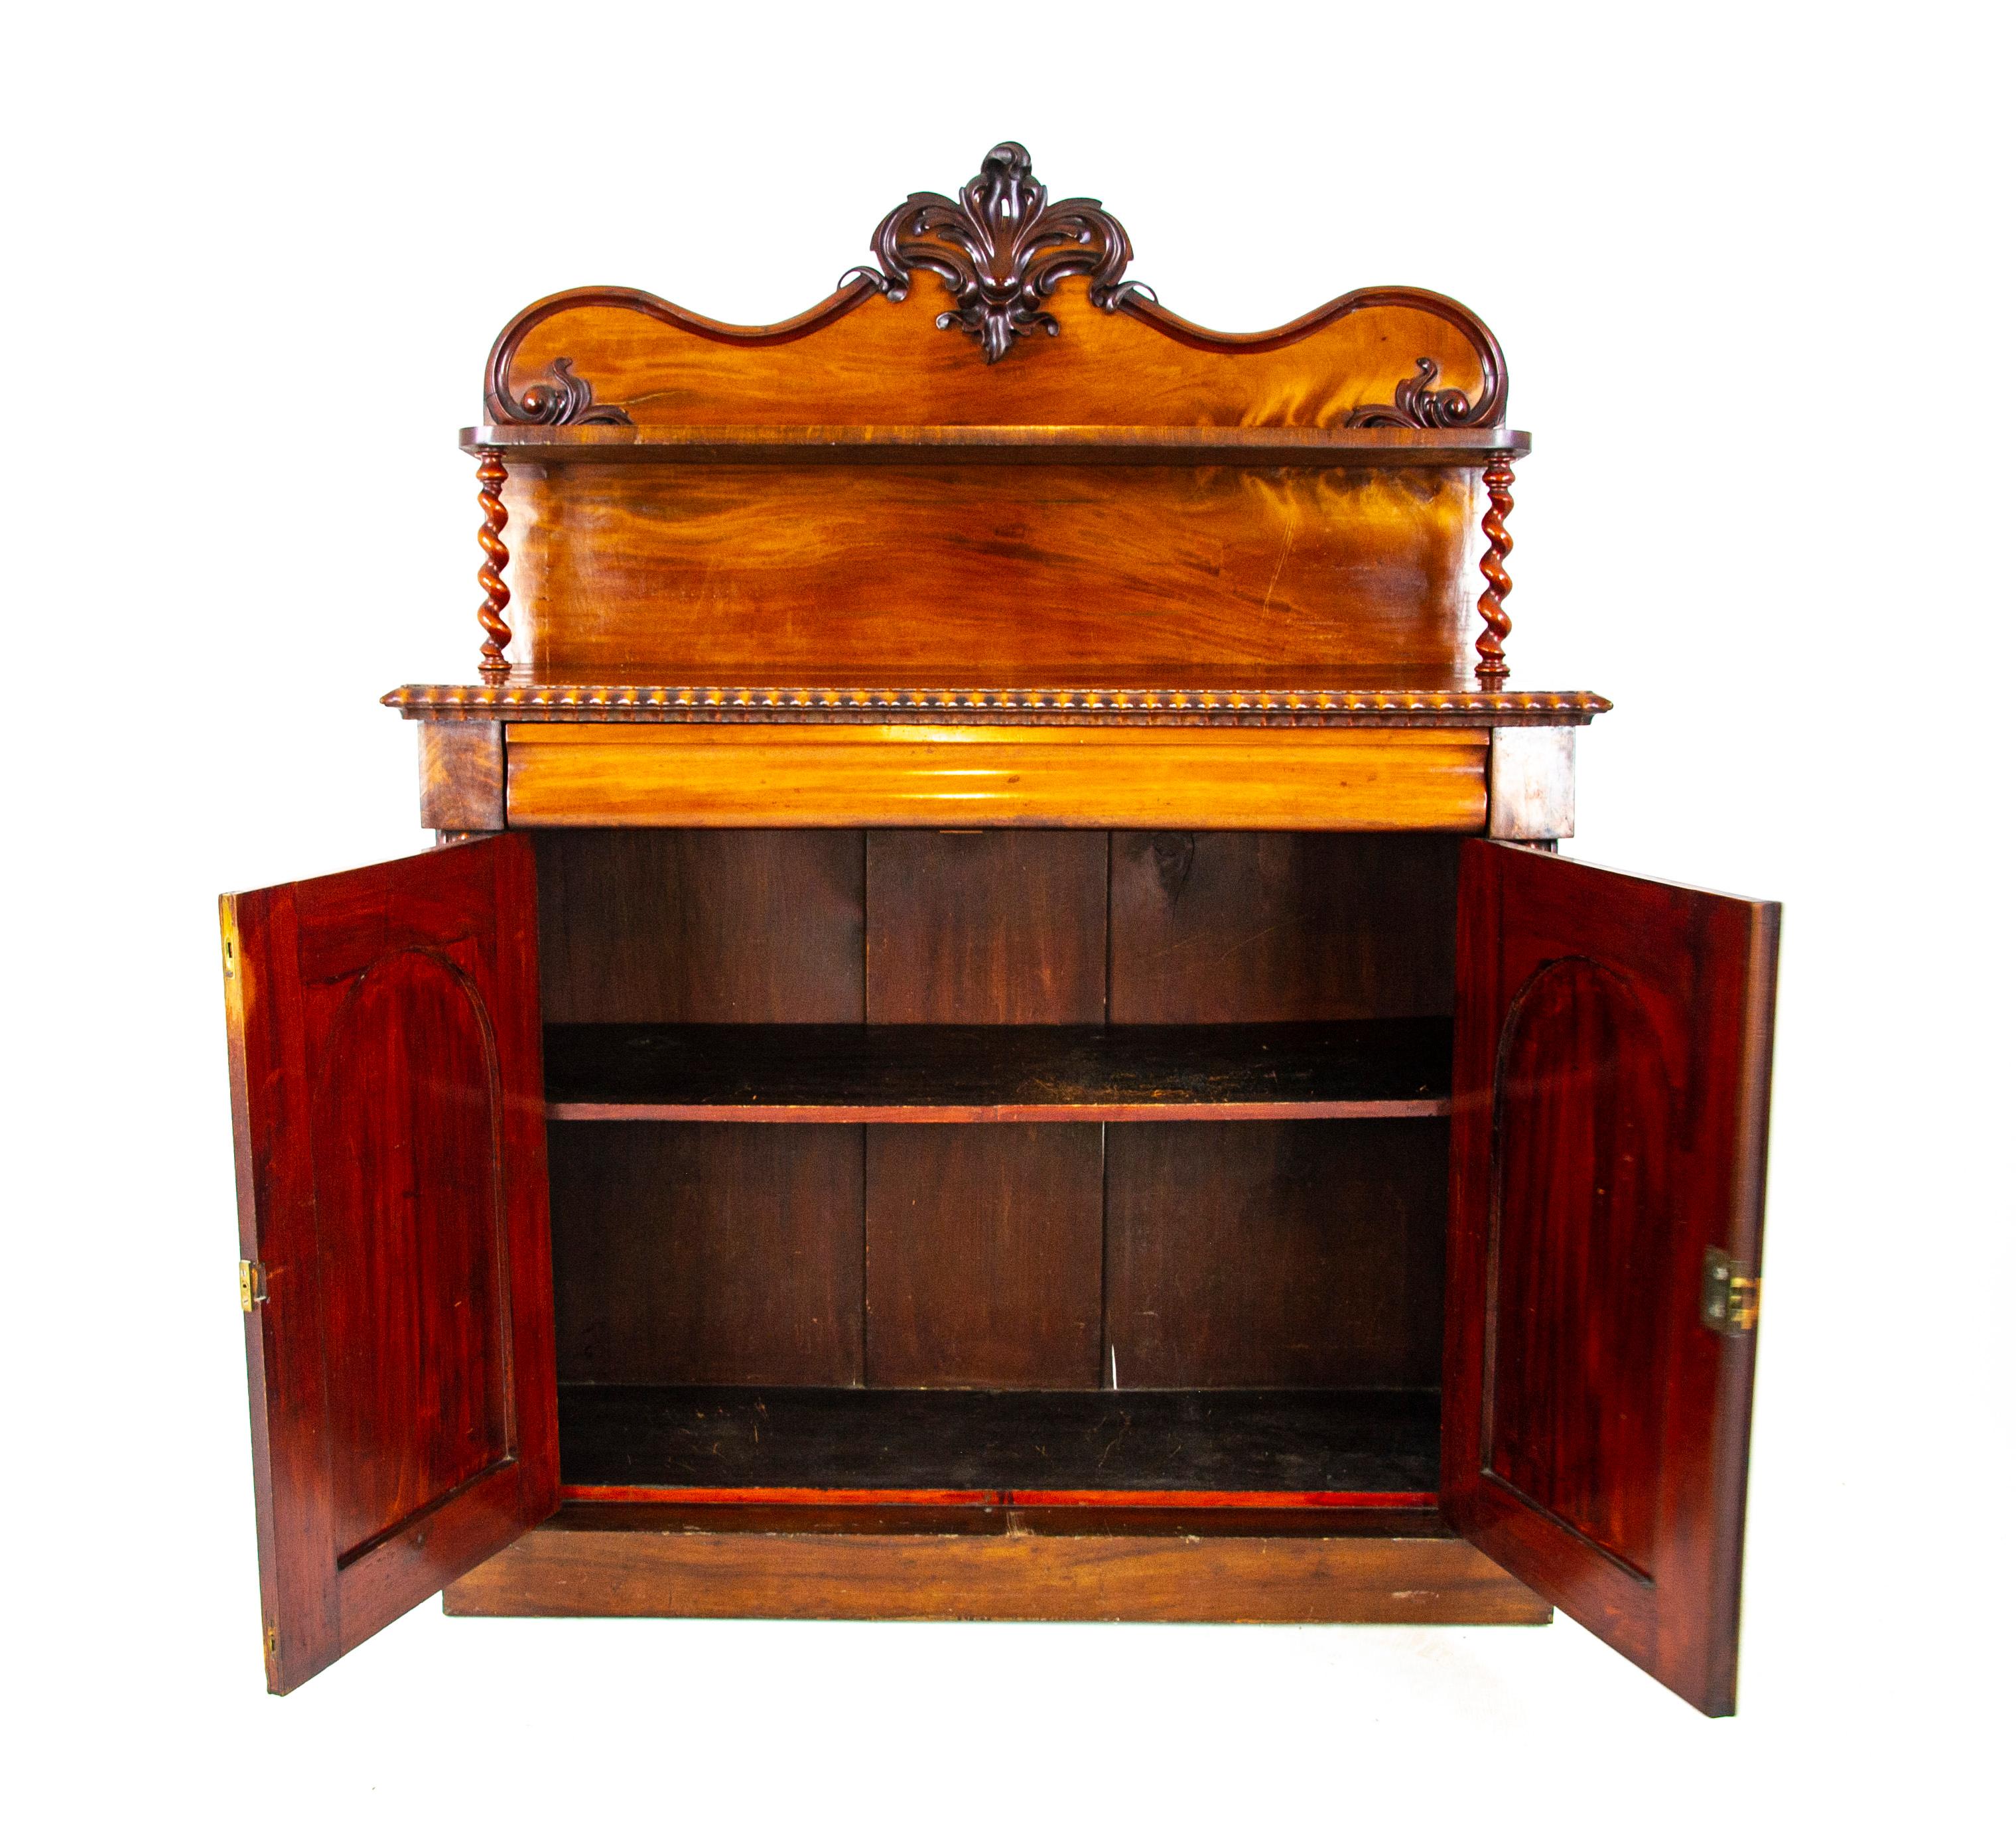 Antique walnut sideboard, Victorian barley twist buffet, antique chiffonier, antique furniture, Scotland 1870, B1337

Scotland 1870
Solid walnut and veneers
Original finish
Shaped carved back
Single shelf below supported by a pair of barley